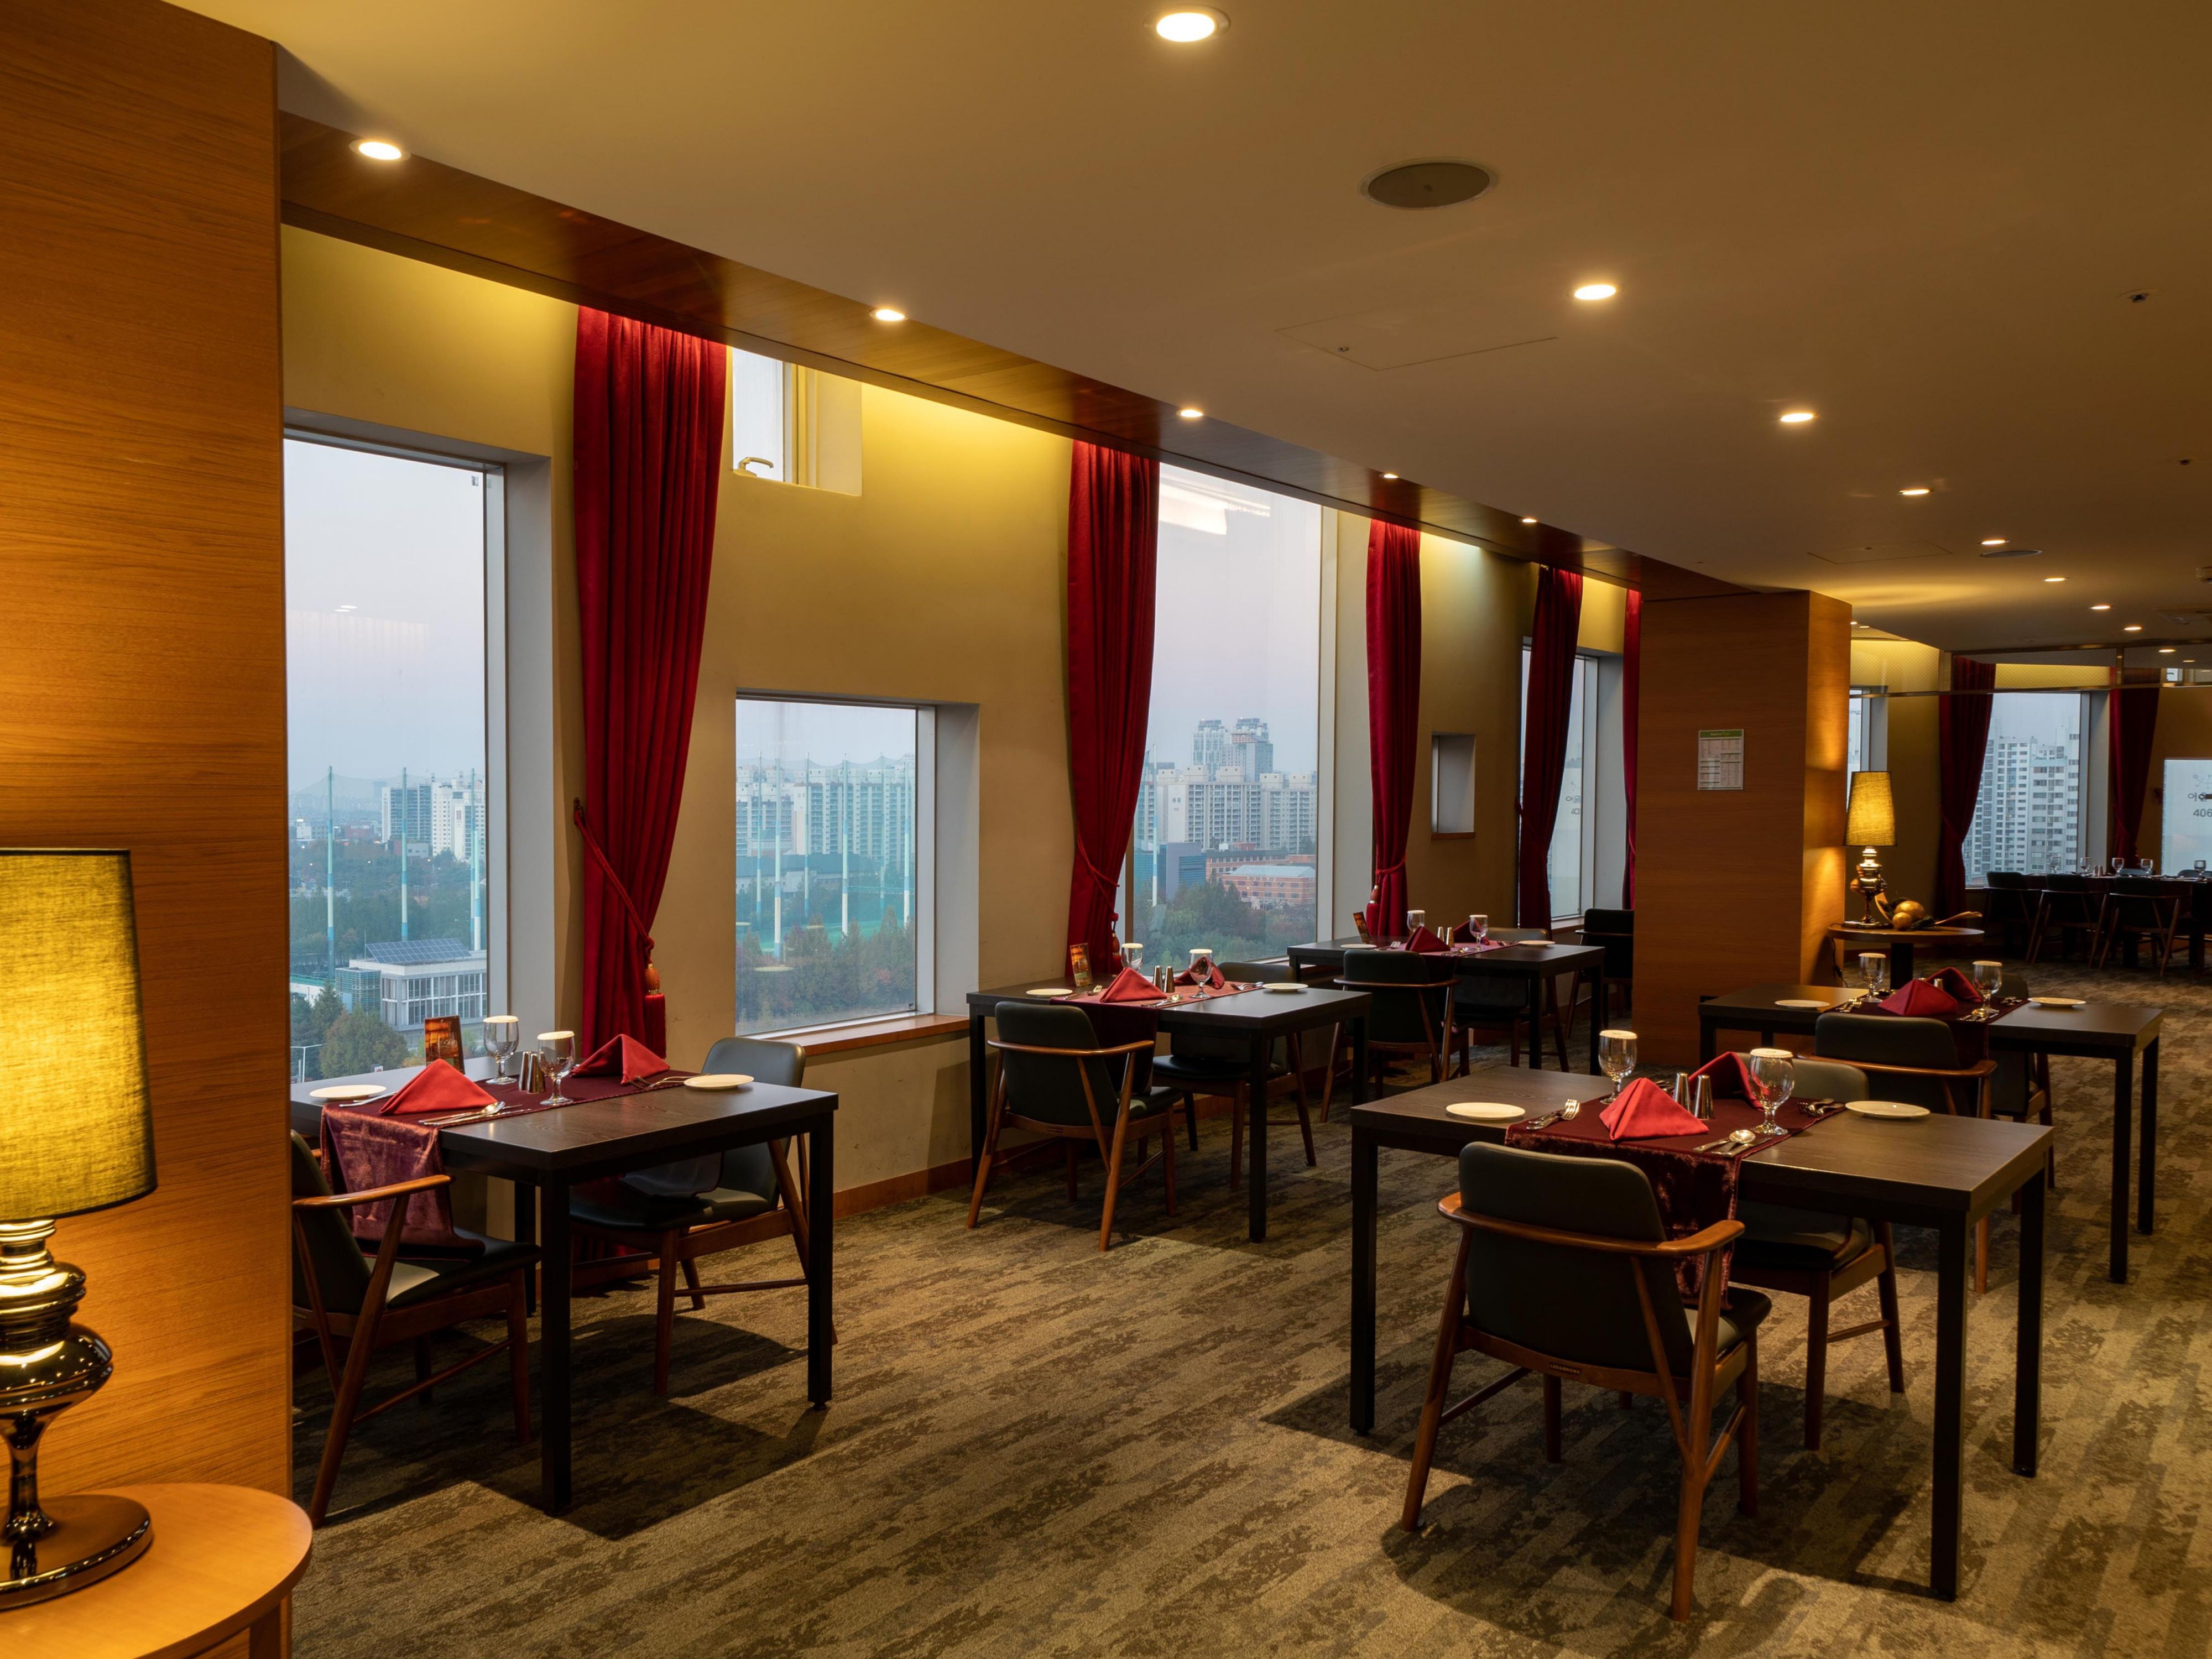 Situated on the 10th floor, La Place Grill & Bar provides a splendid night of Gwangju. Savor European style seasonal course dinner prepared by the Executive chef, complemented with the perfect wine and whiskey recommended by a professional
sommelier.